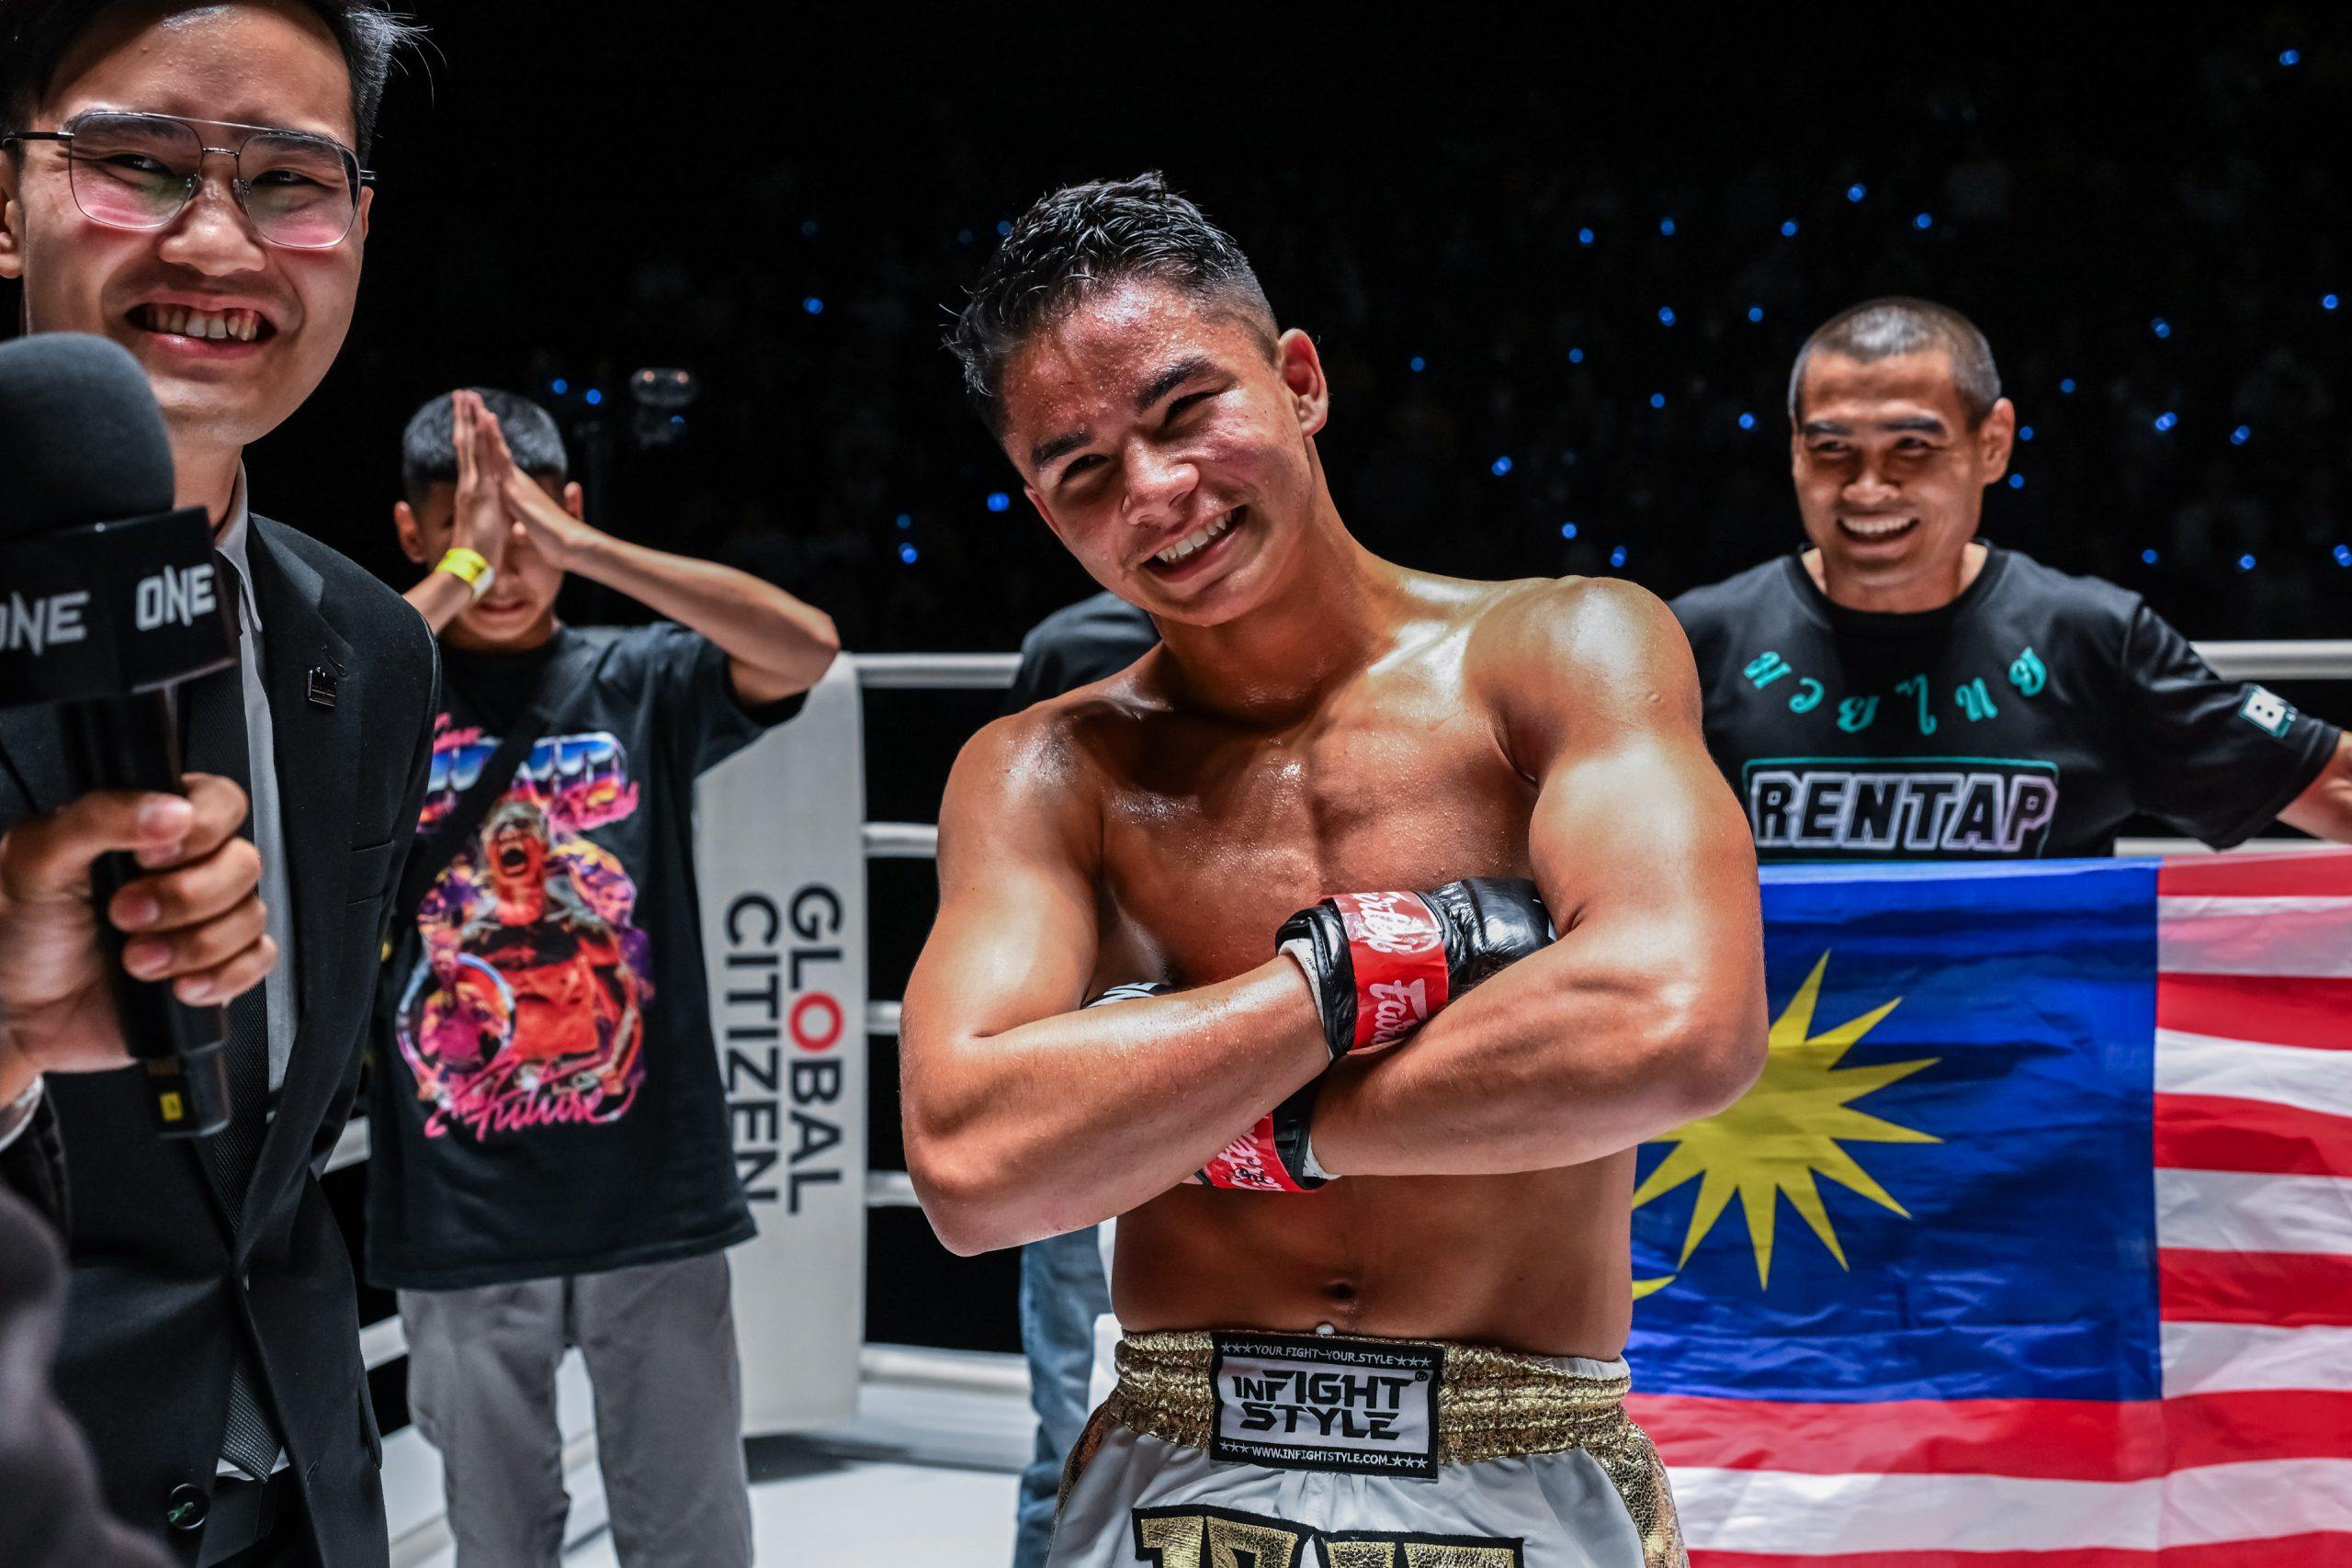 Johan Ghazali celebrates after earning a US$100,000 ONE contract. Photos: ONE Championship